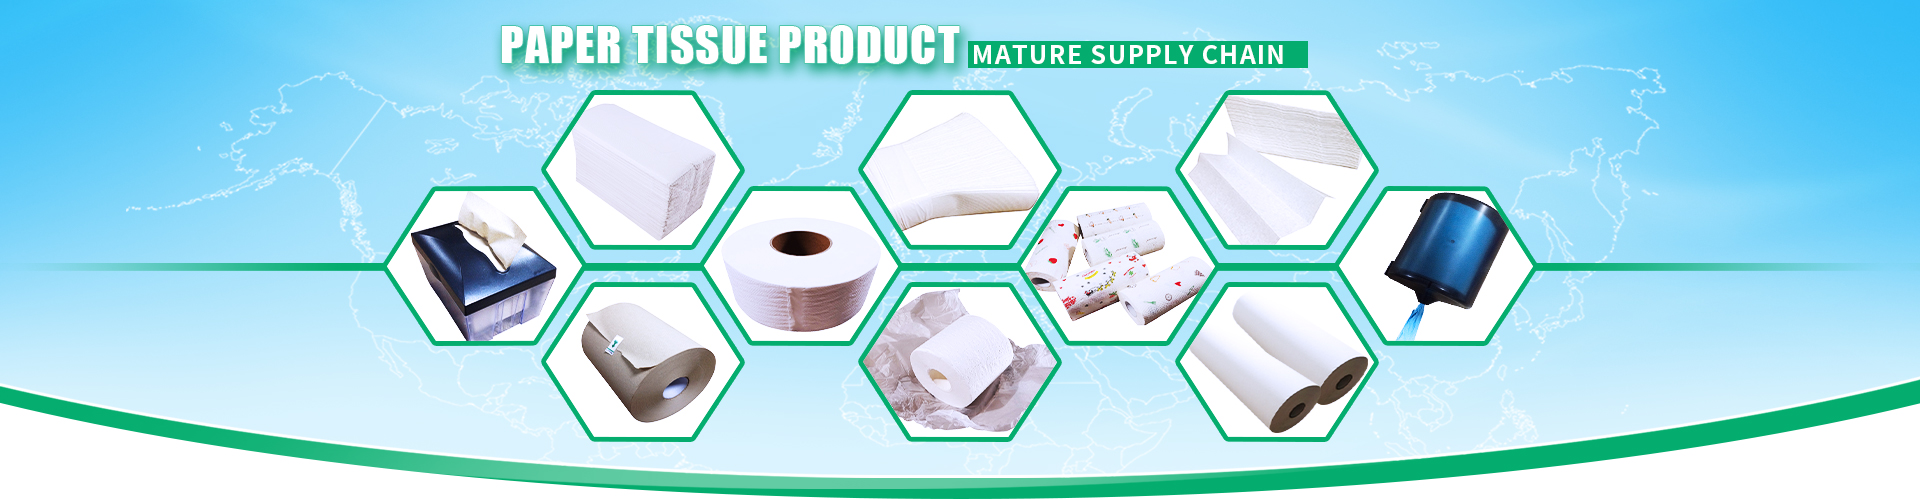 Interfold Wipe Towel 1/2 Fold Bamboo Natural Brown - Chaozhou Soft Paper Products Co.,Ltd